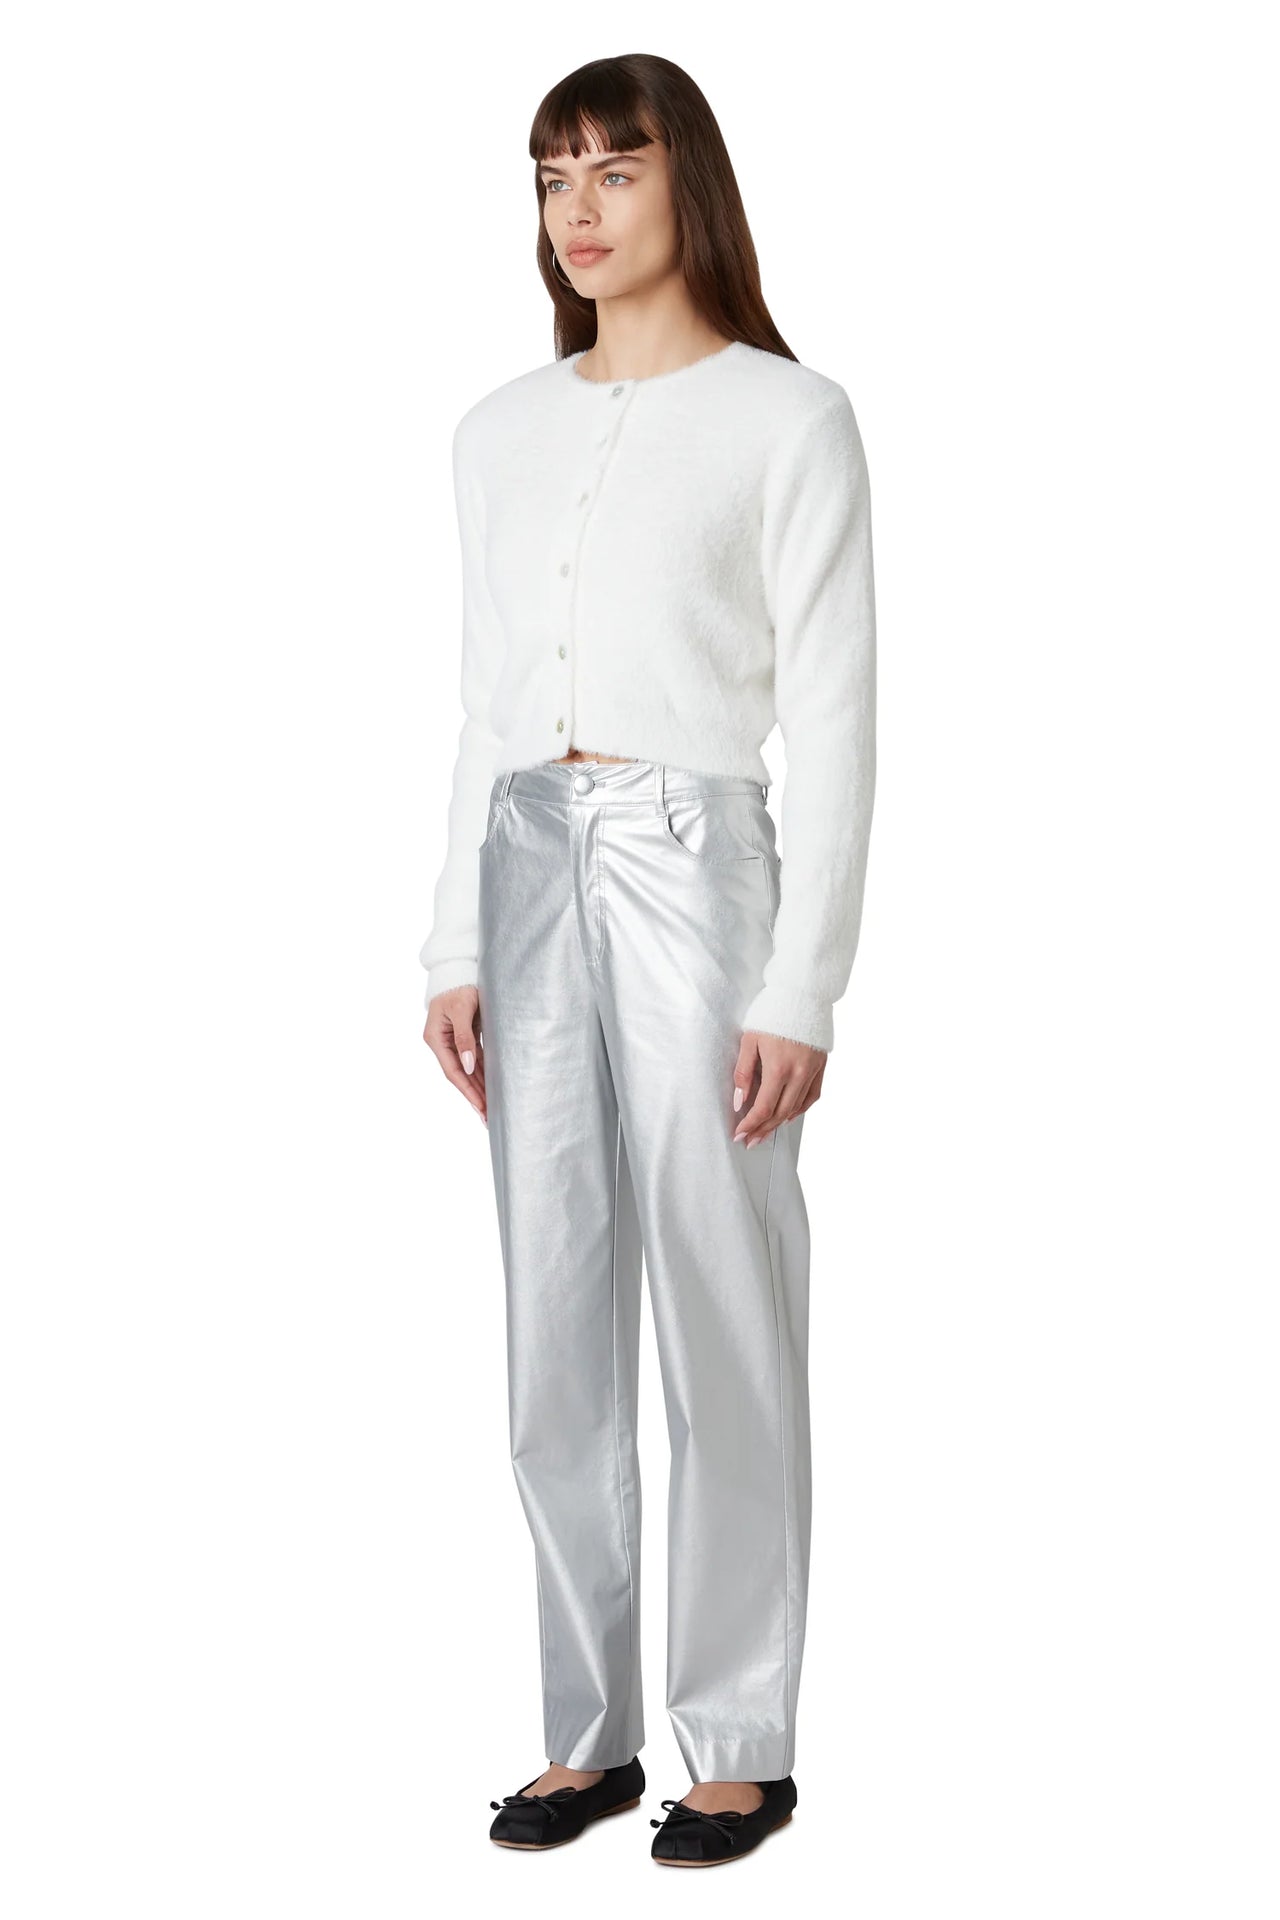 Mariah Silver Trouser, Pant Bottom by NIA | LIT Boutique